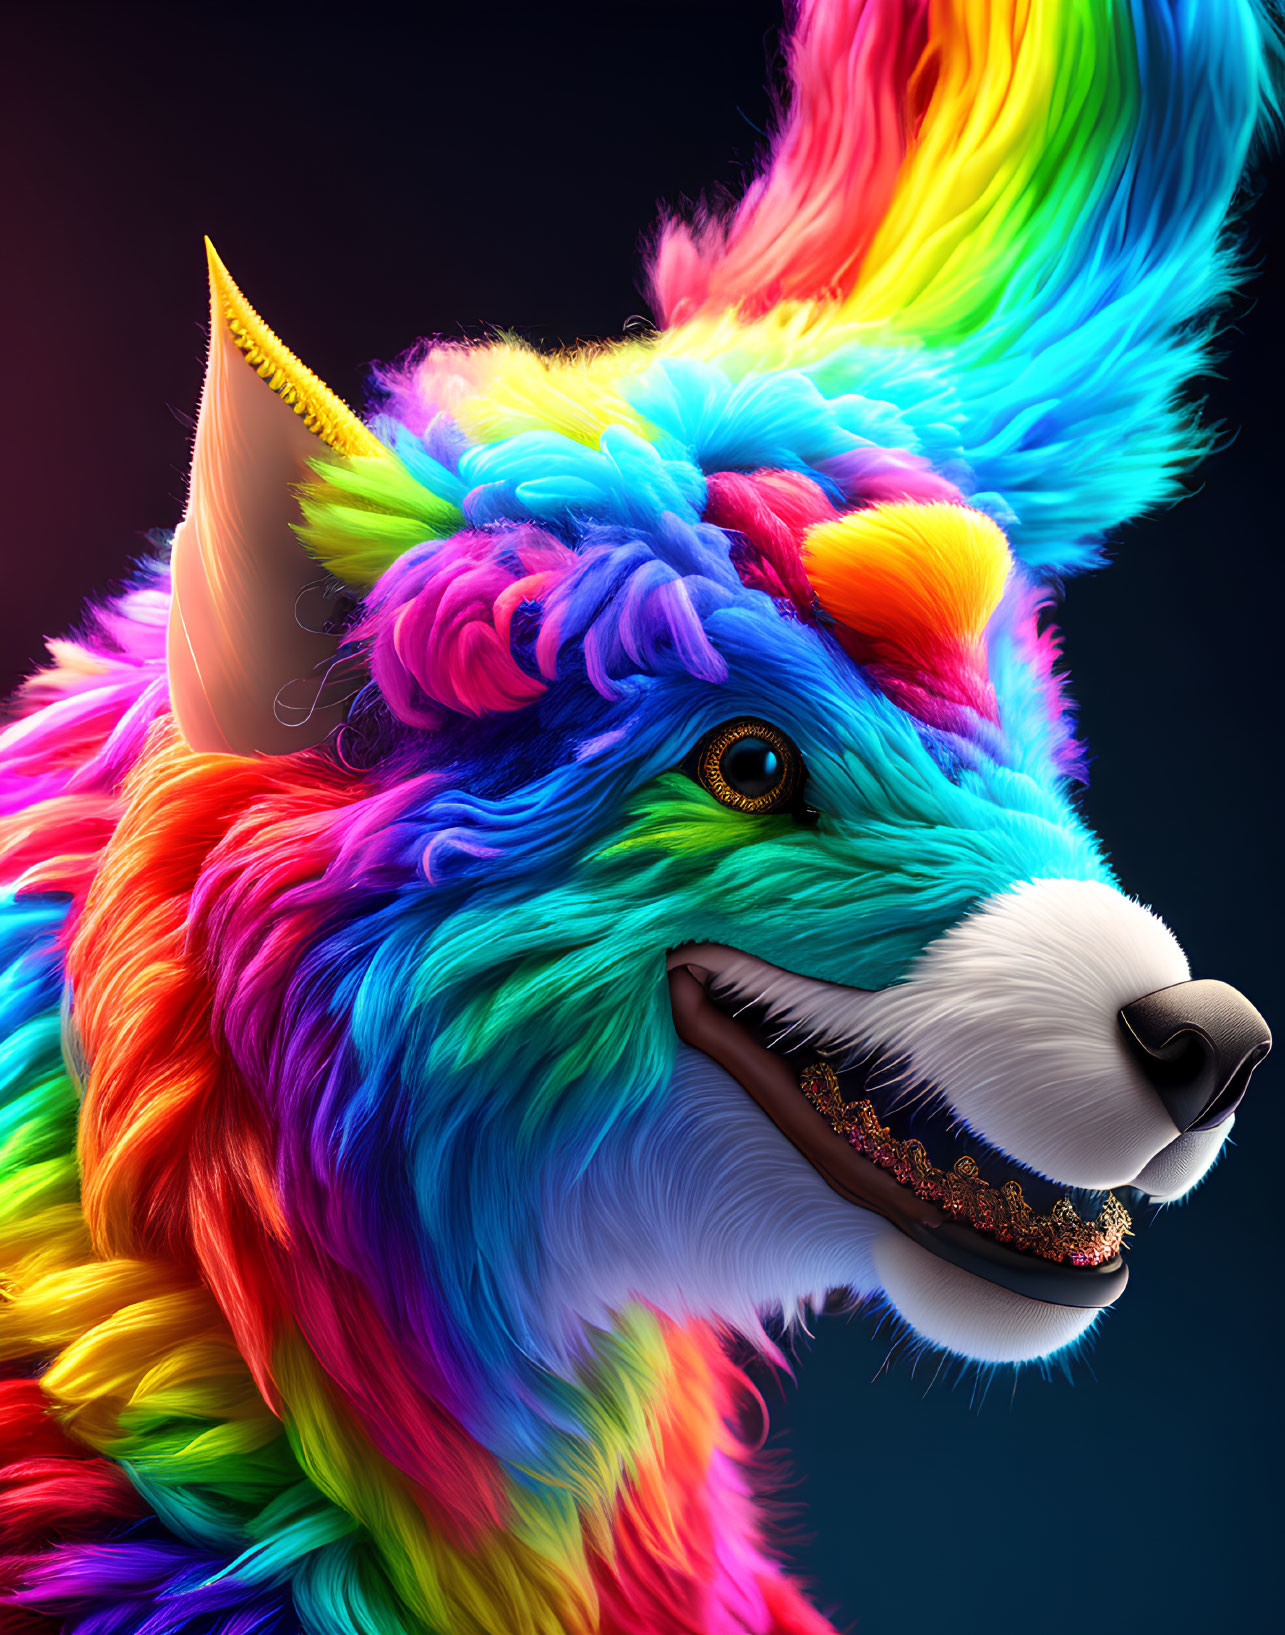 Colorful digital artwork of a fantastical creature with rainbow fur and unicorn horn.